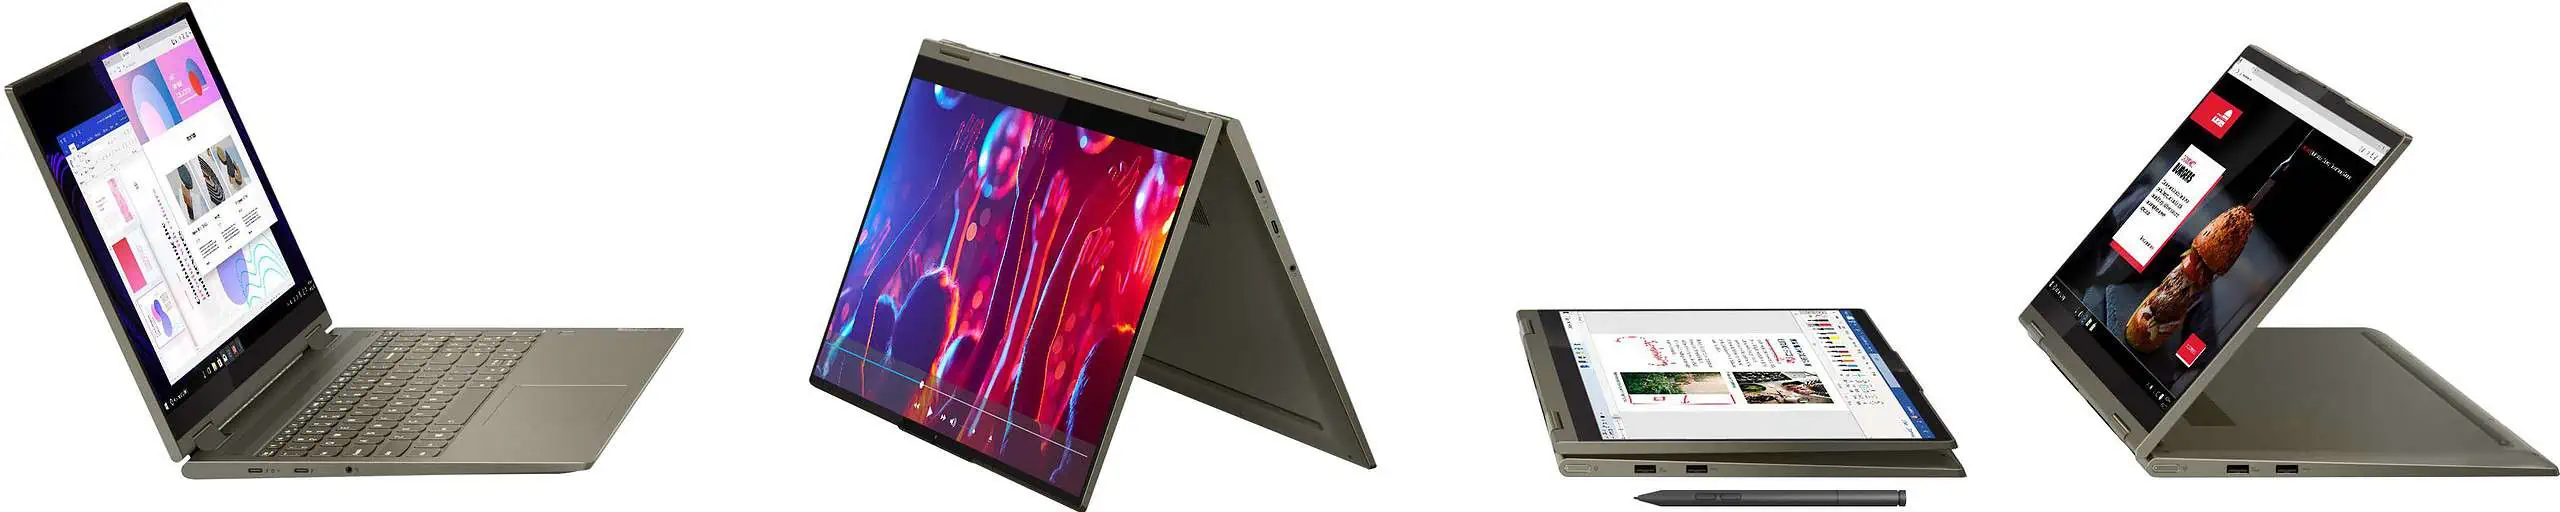 Laptop, Tent, Tablet, and Stand modes of Yoga i7